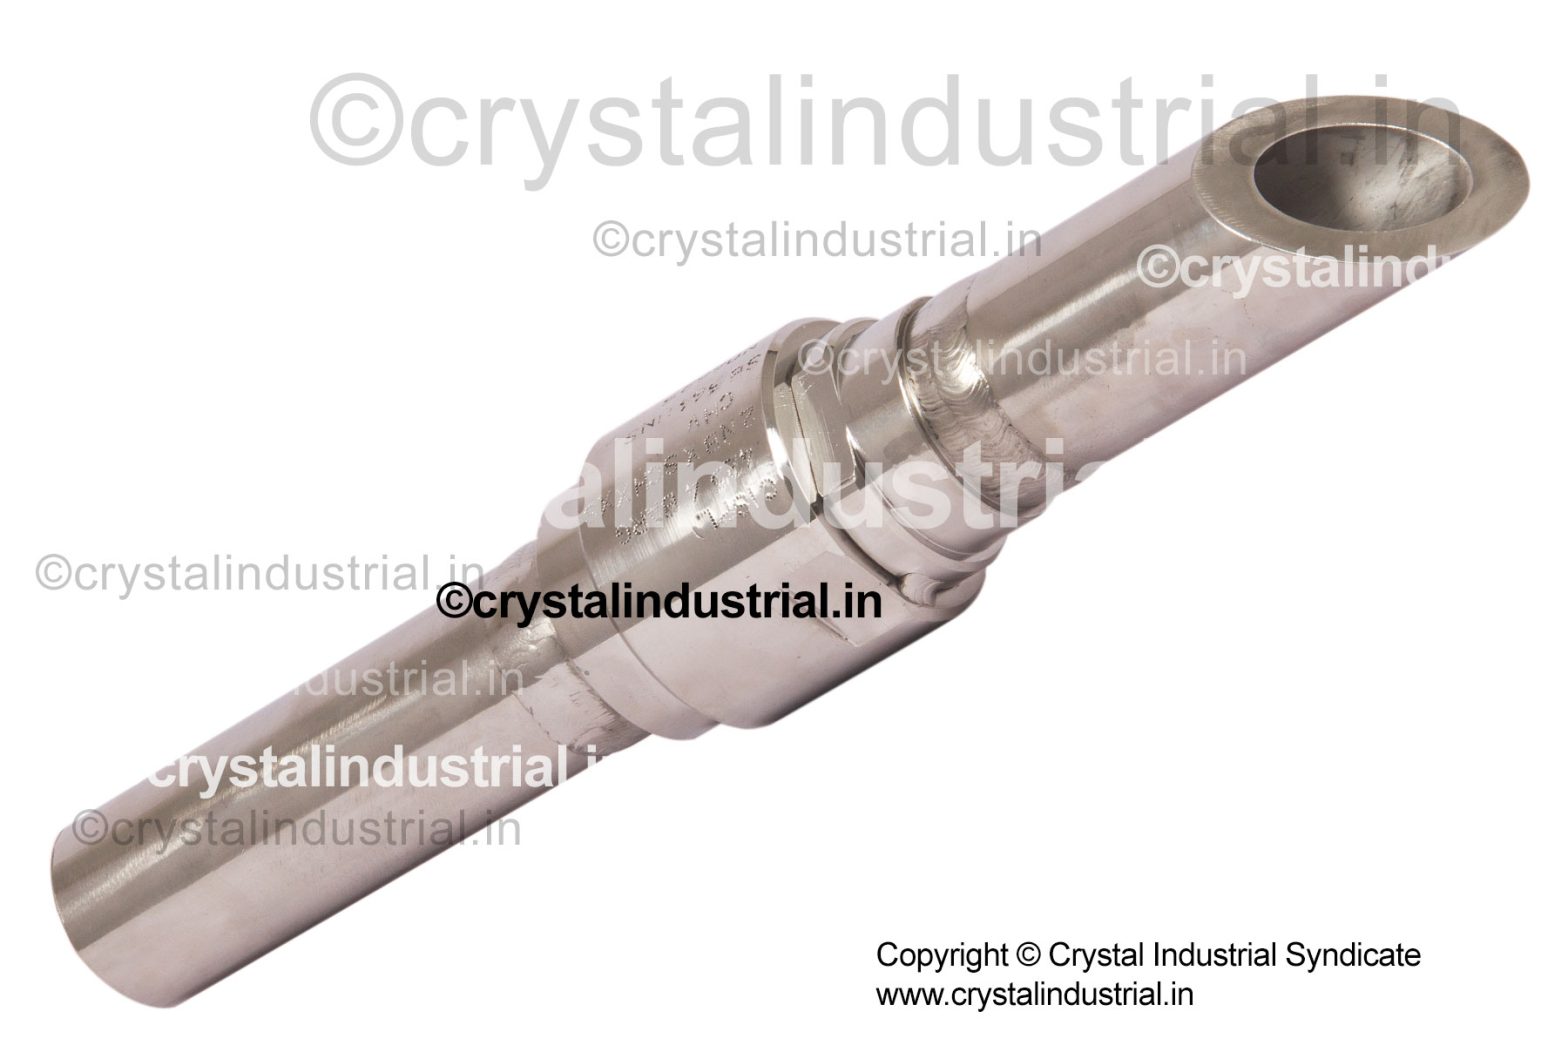 Chemical injection quills from Crystal Industrial